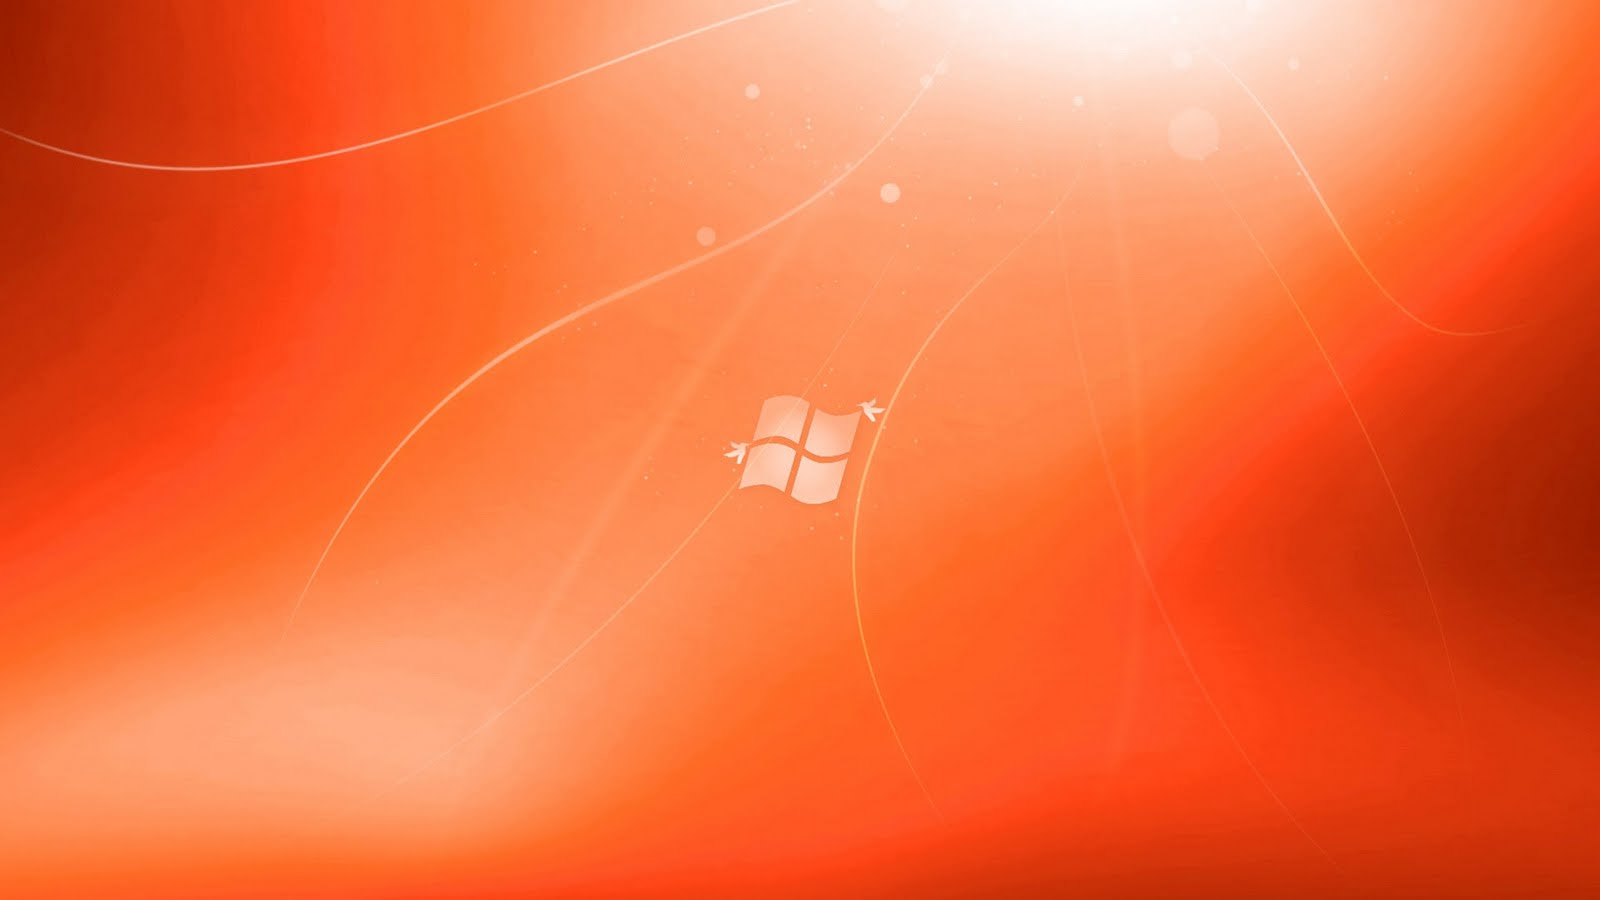 New HD Wallpapers: Windows 7(Seven) HD Wallpapers For ...